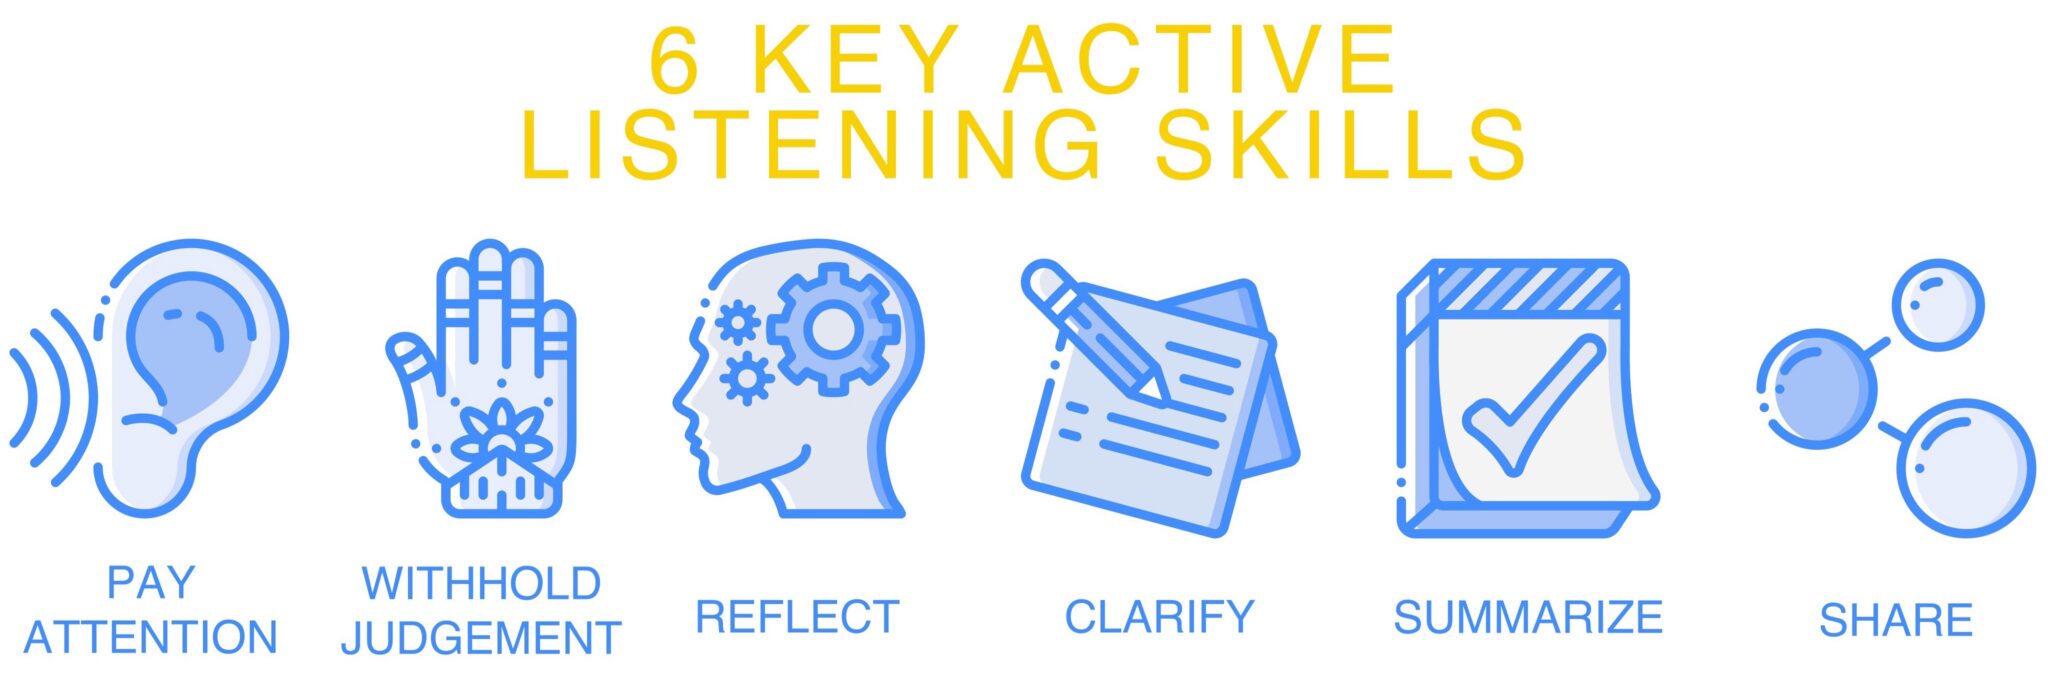 images of effective listening